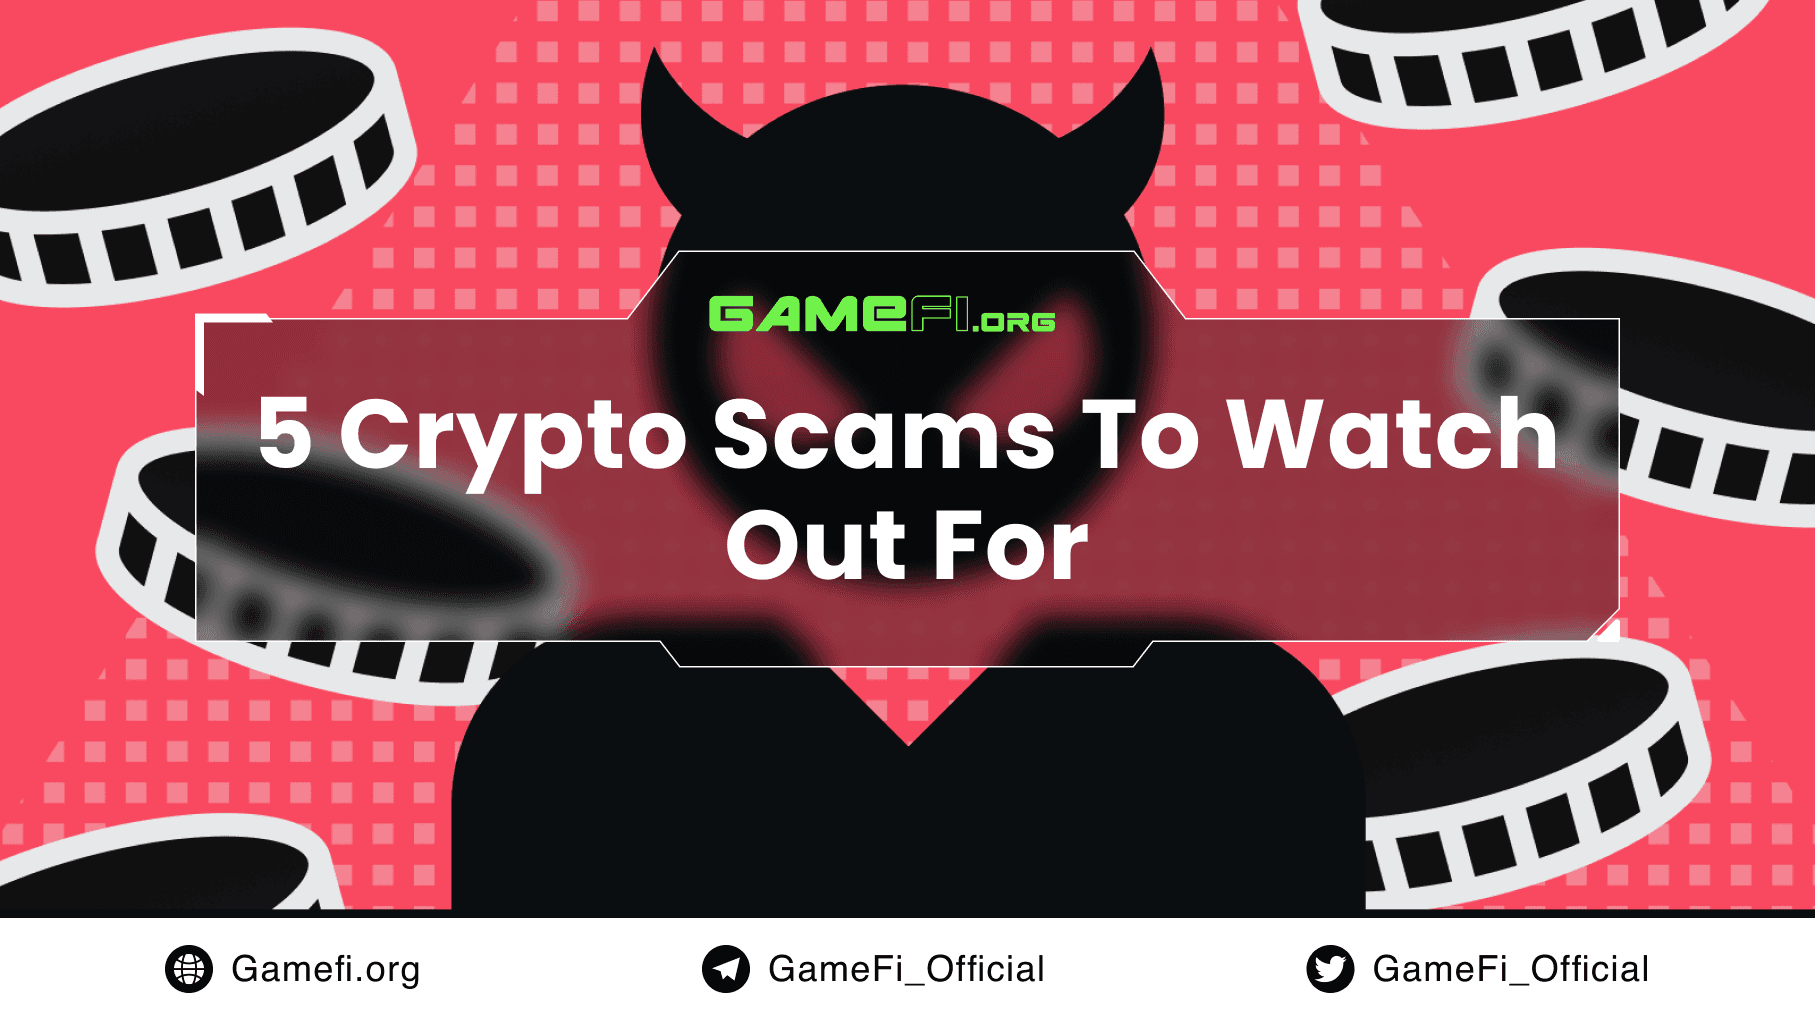 5 Crypto Scams To Watch Out For